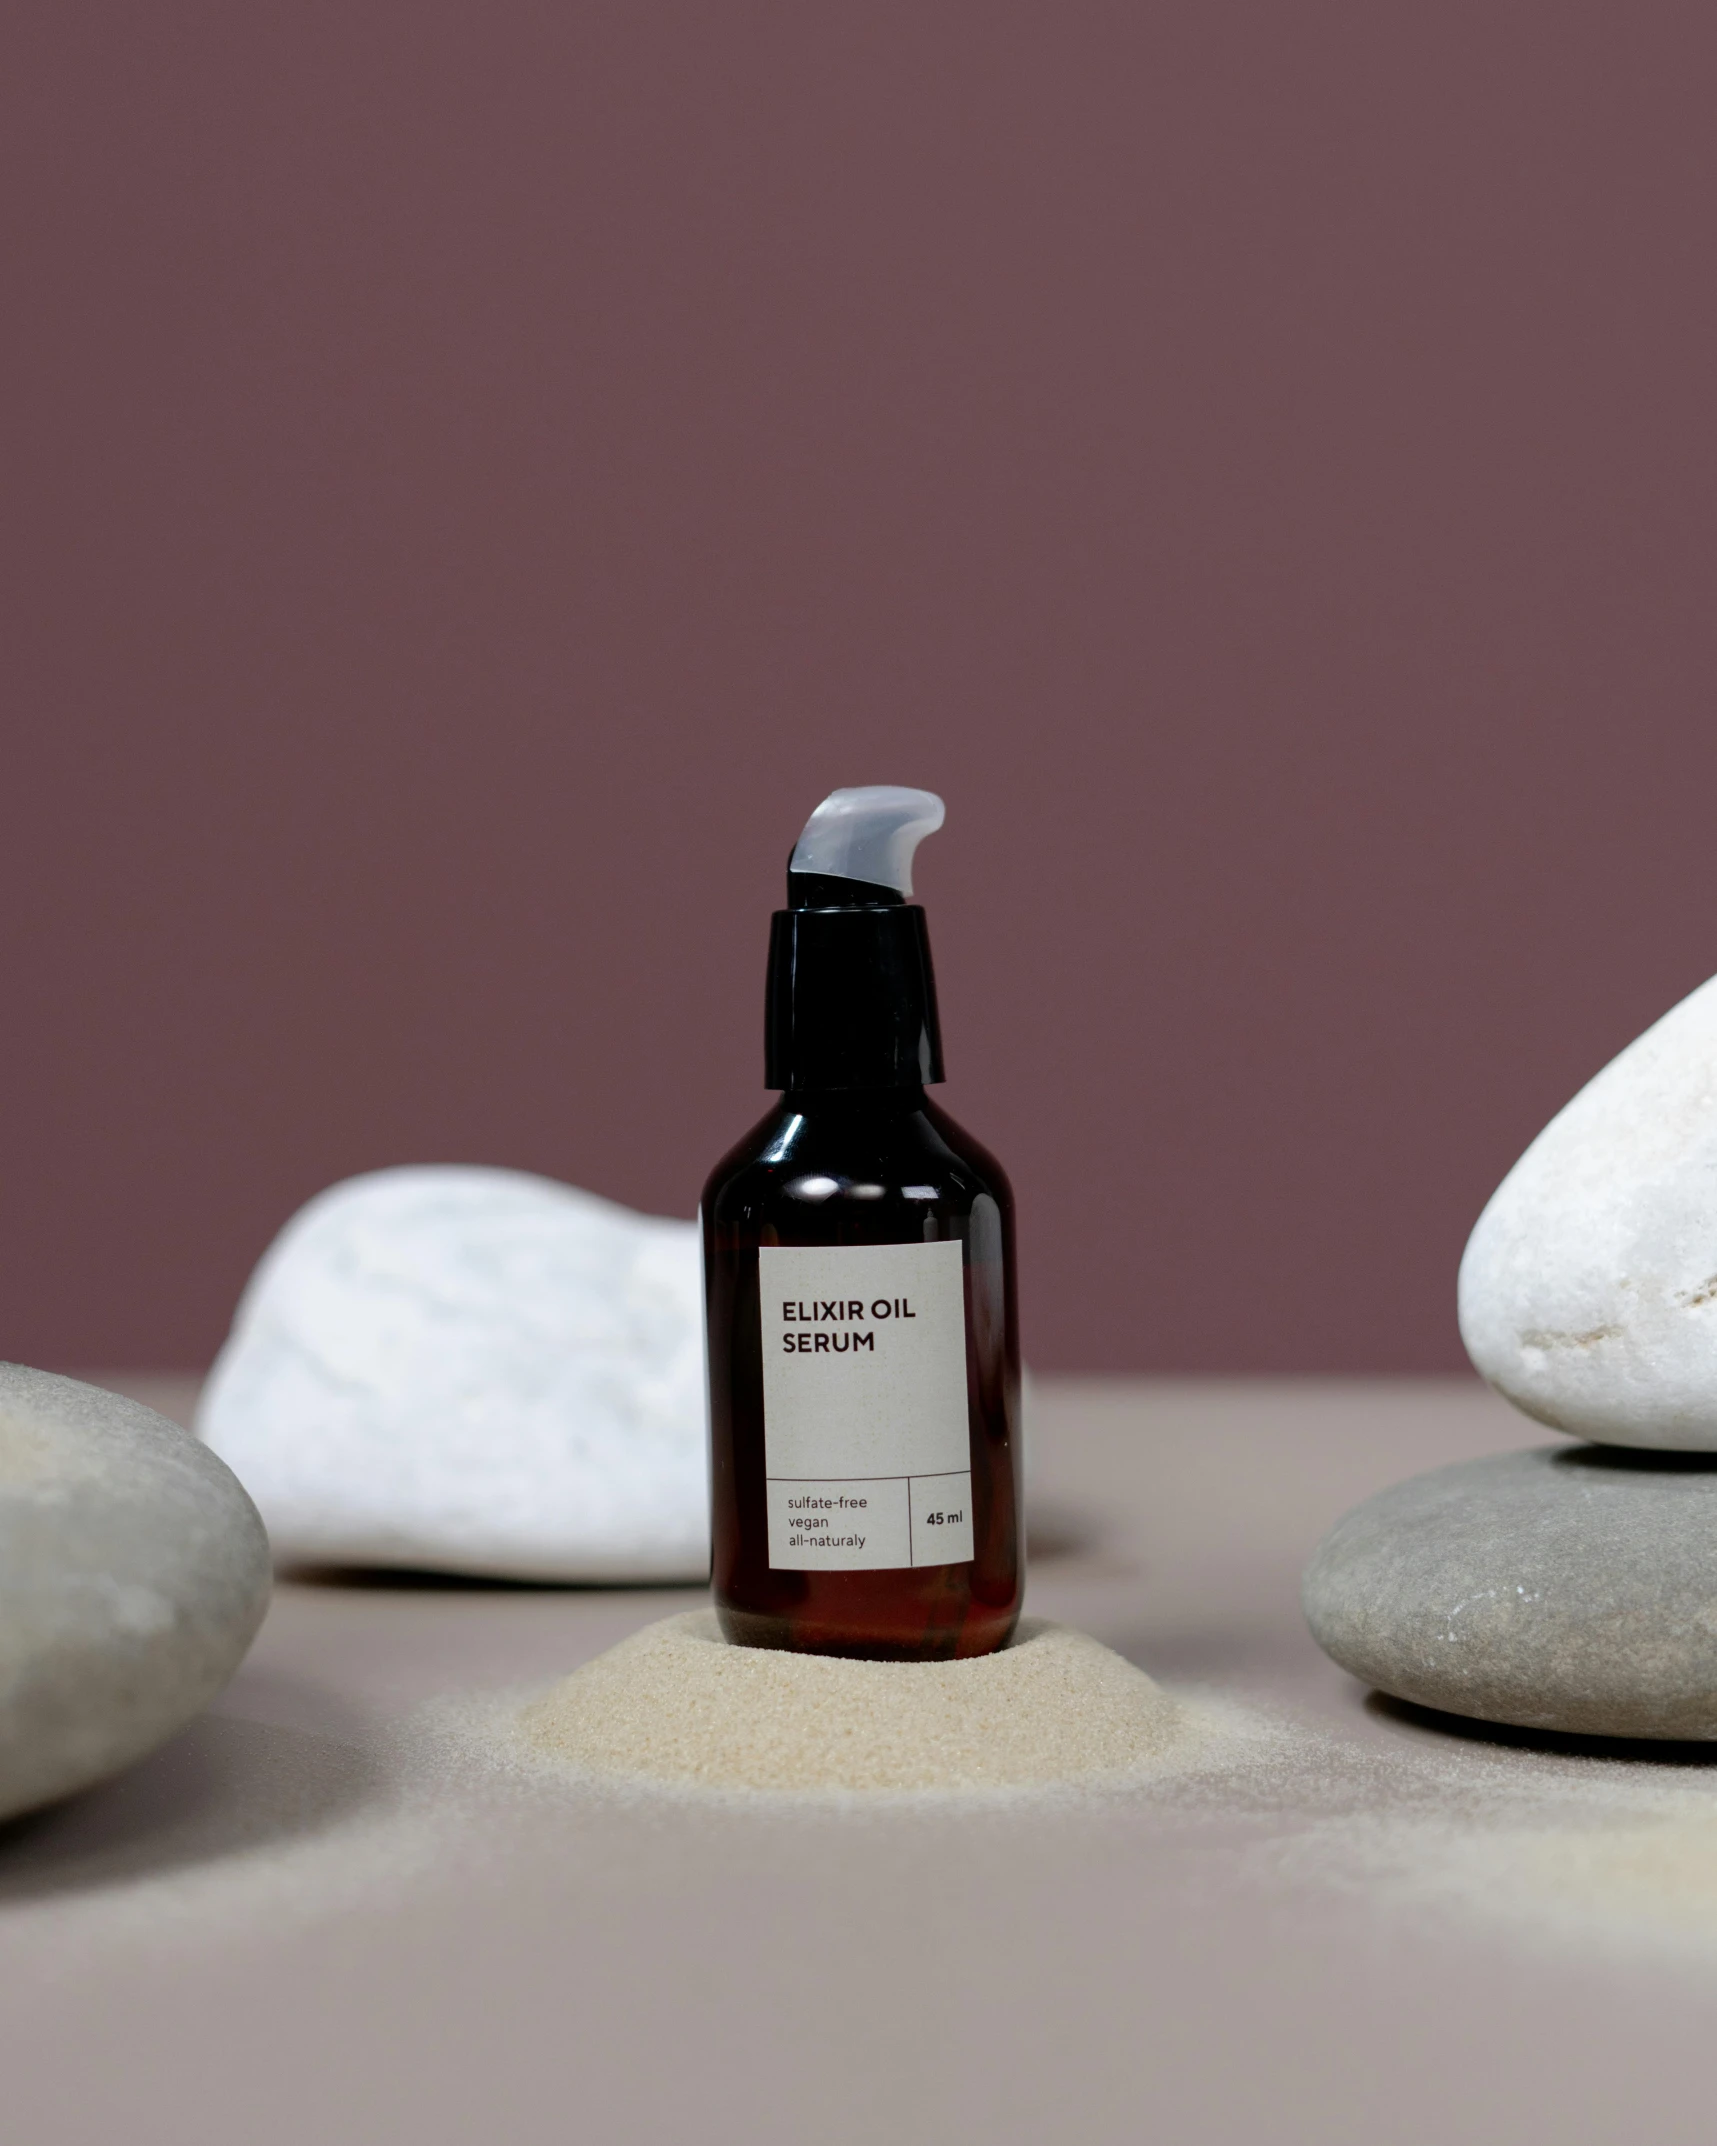 a bottle of liquid sitting on top of a pile of rocks, inspired by Évariste Vital Luminais, unsplash, full view of face and body, black fine lines on warm brown, japanese collection product, panel